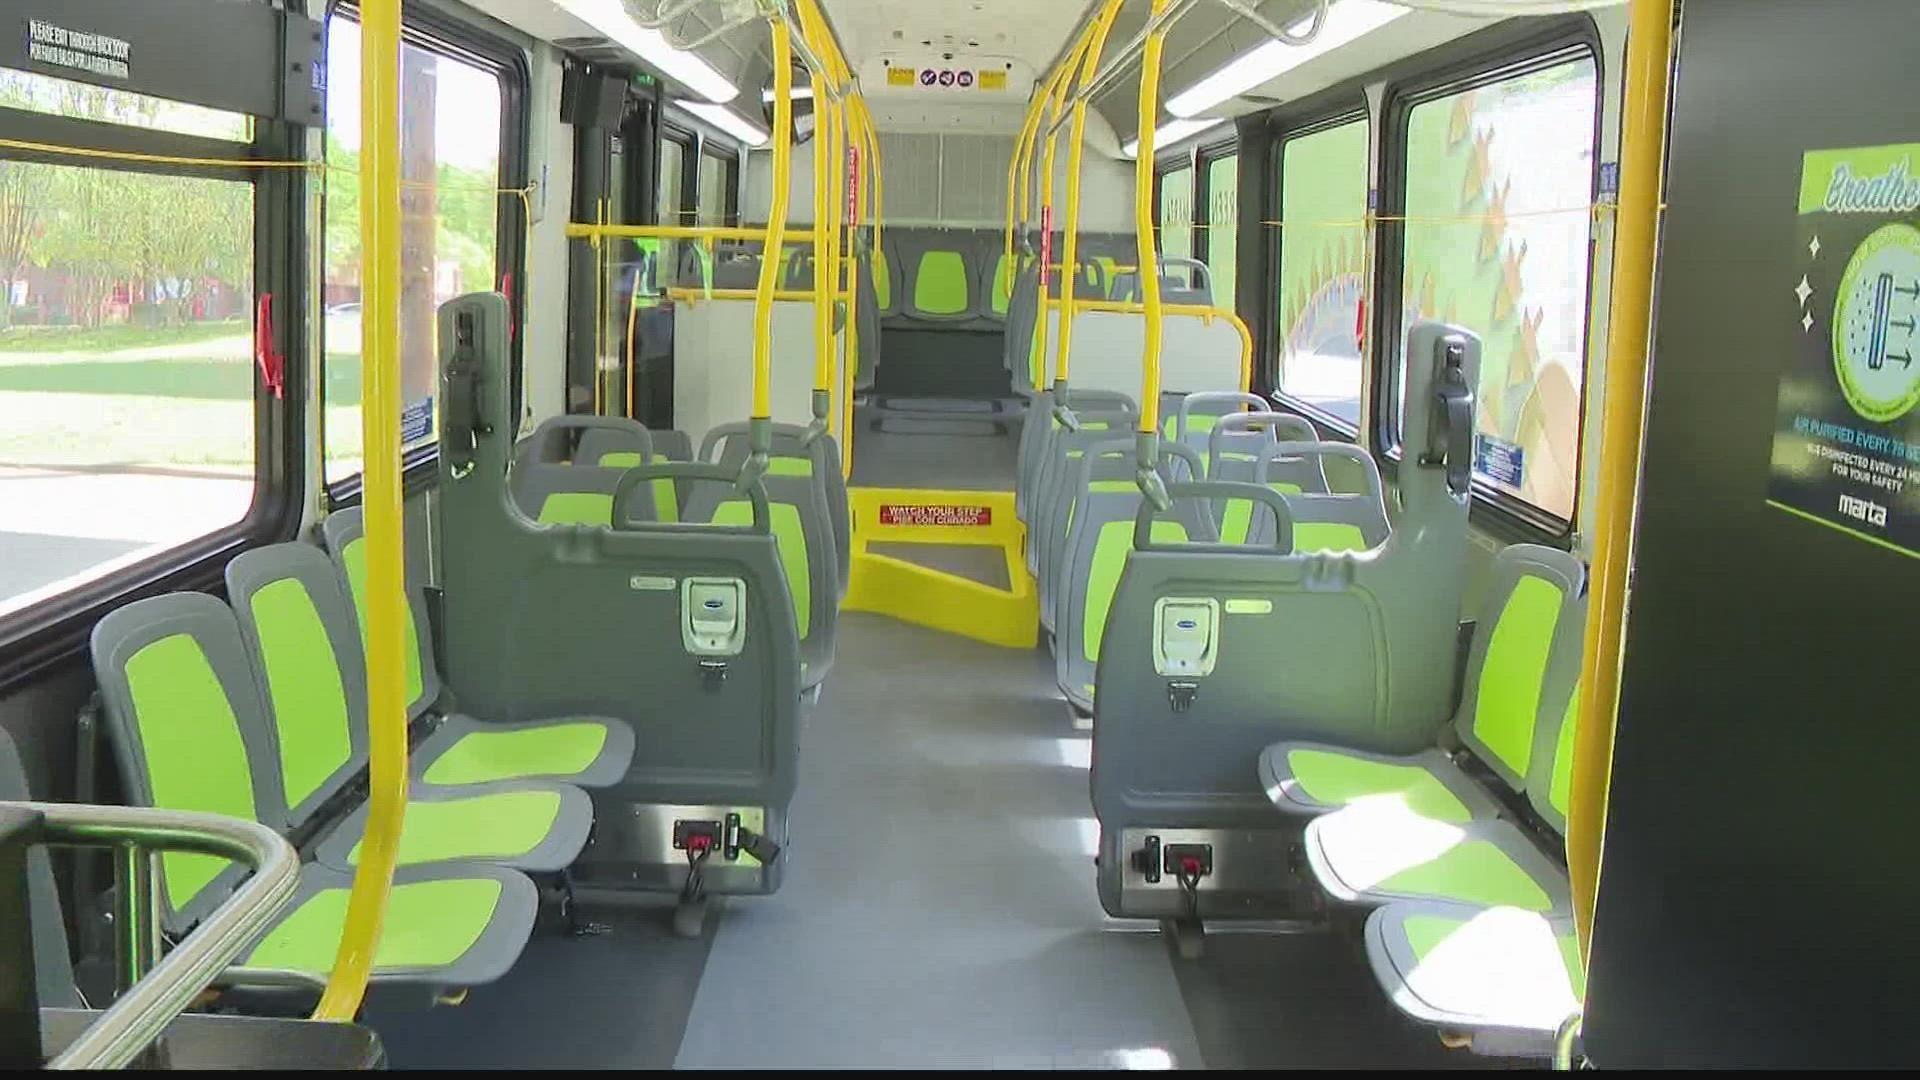 MARTA hopes to have a fleet of 12 electric buses.